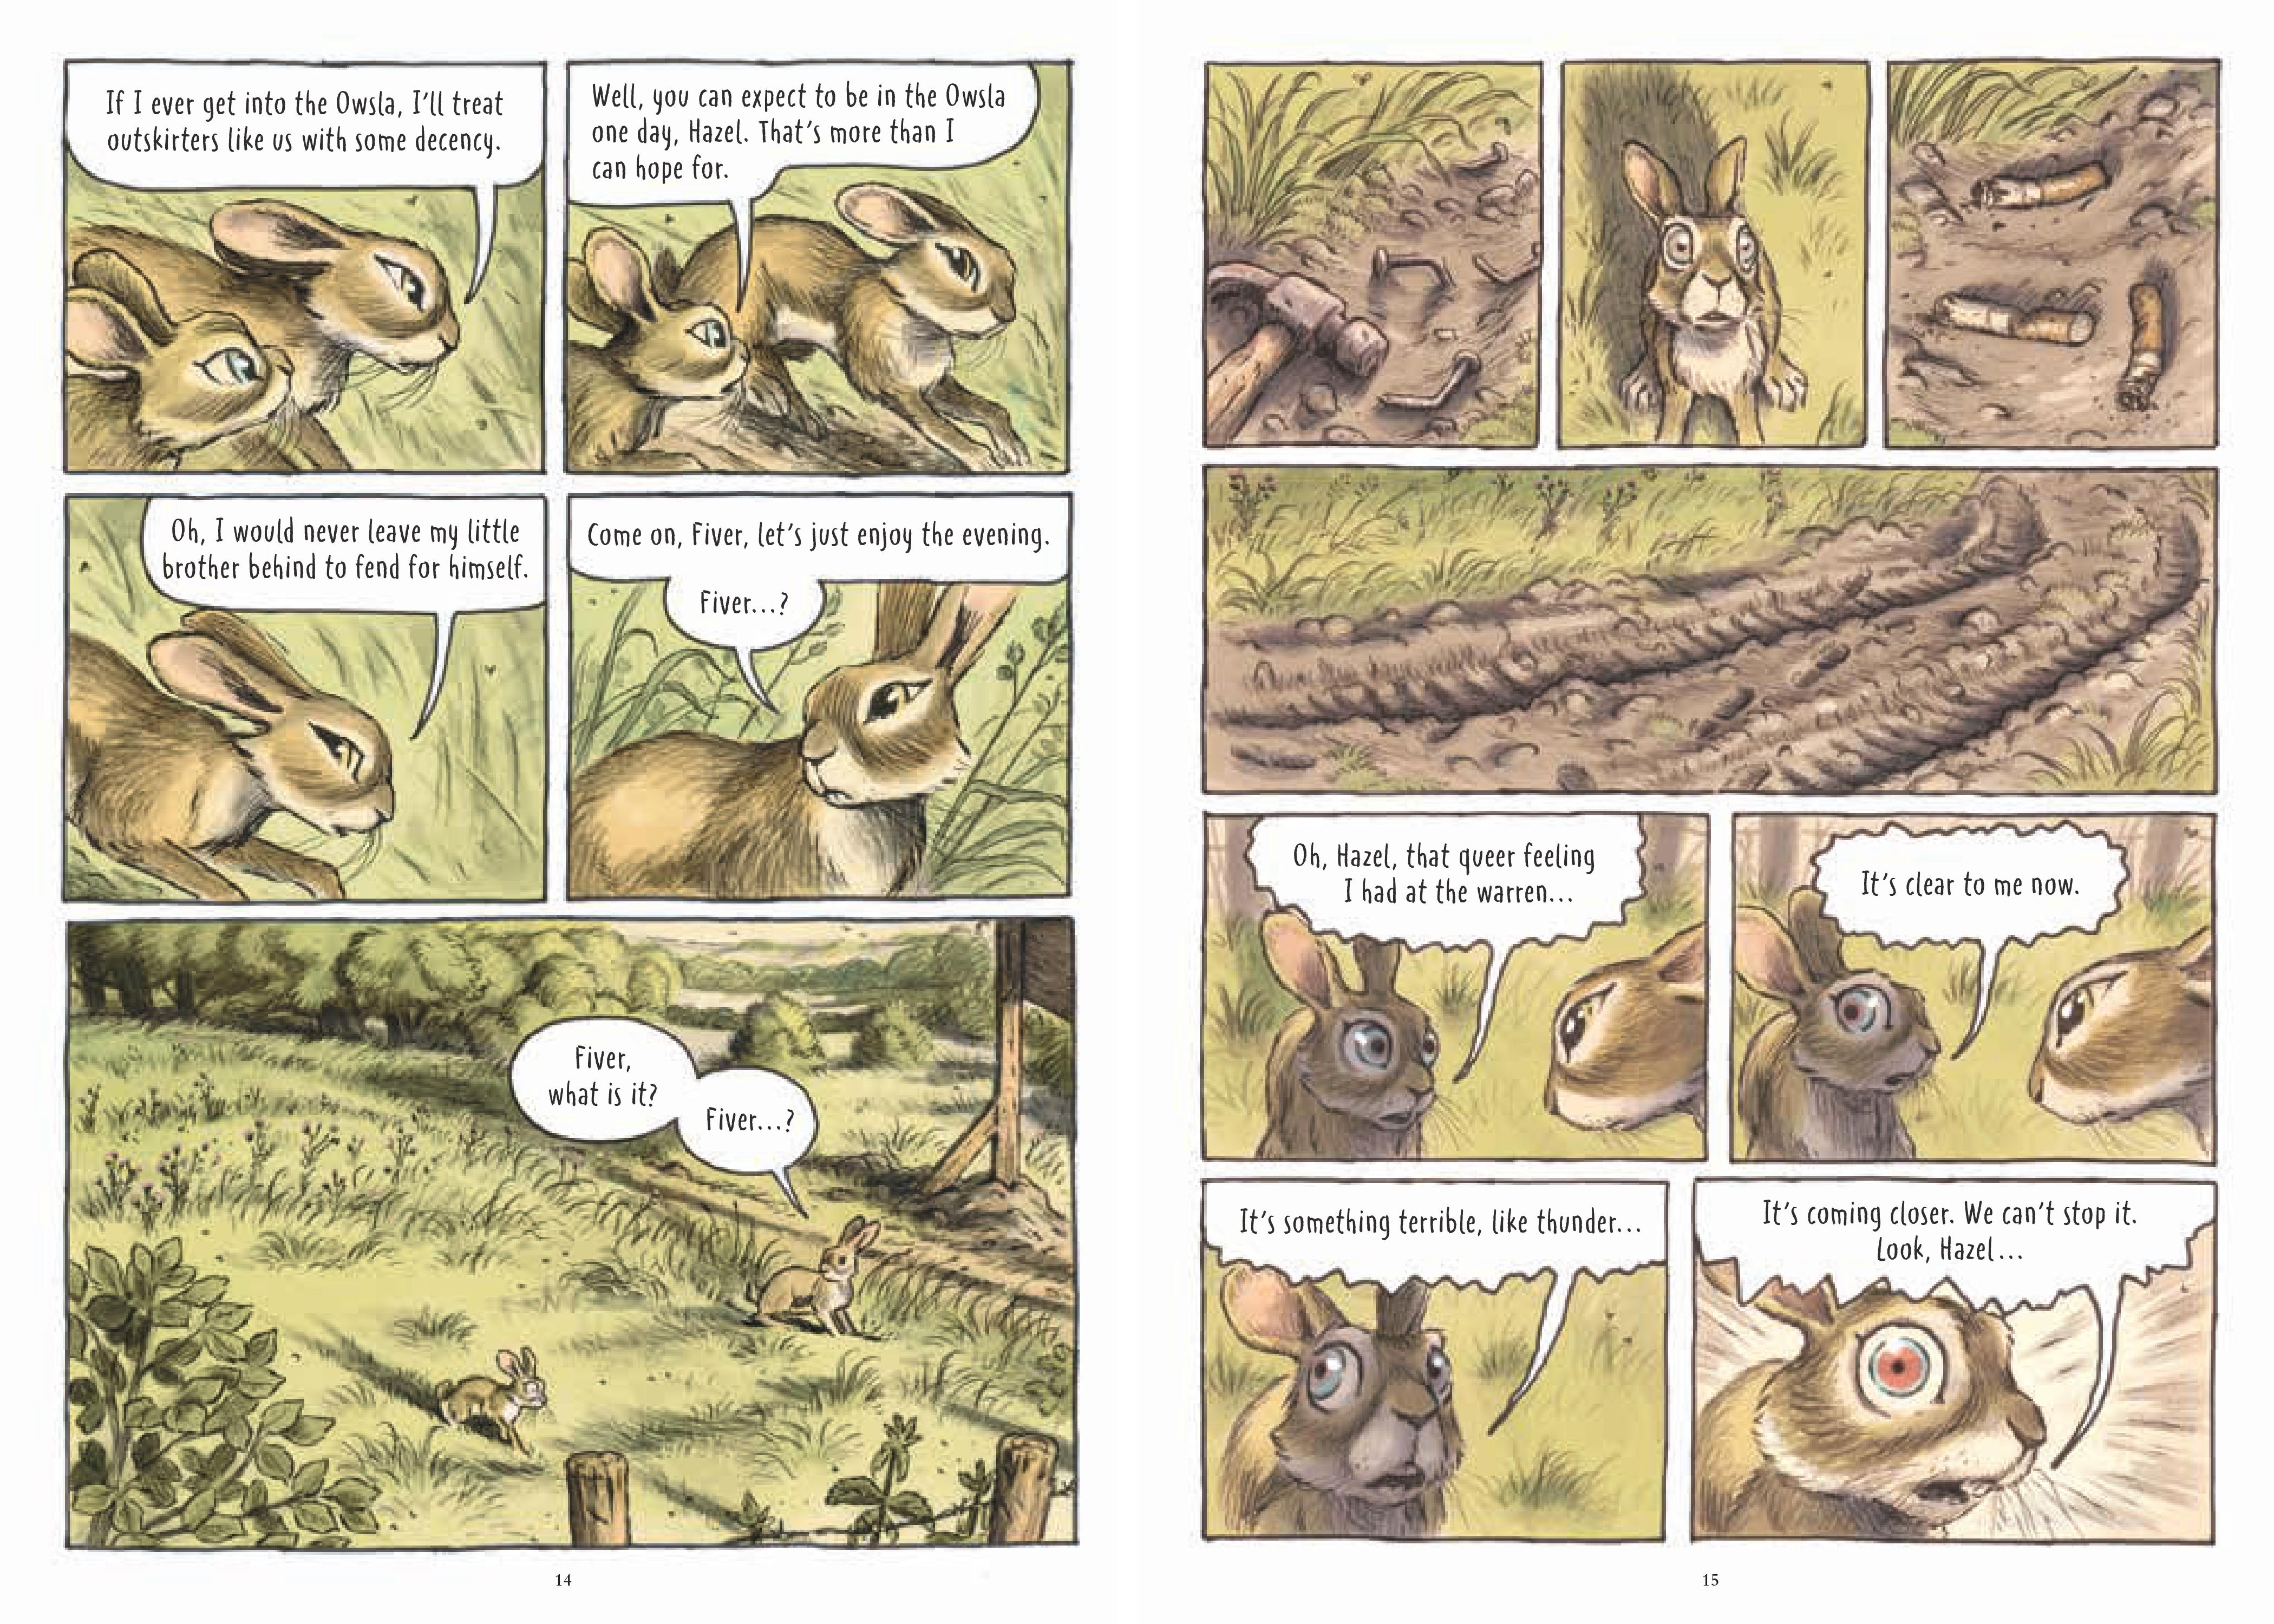 Fiver has a vision in Watership Down